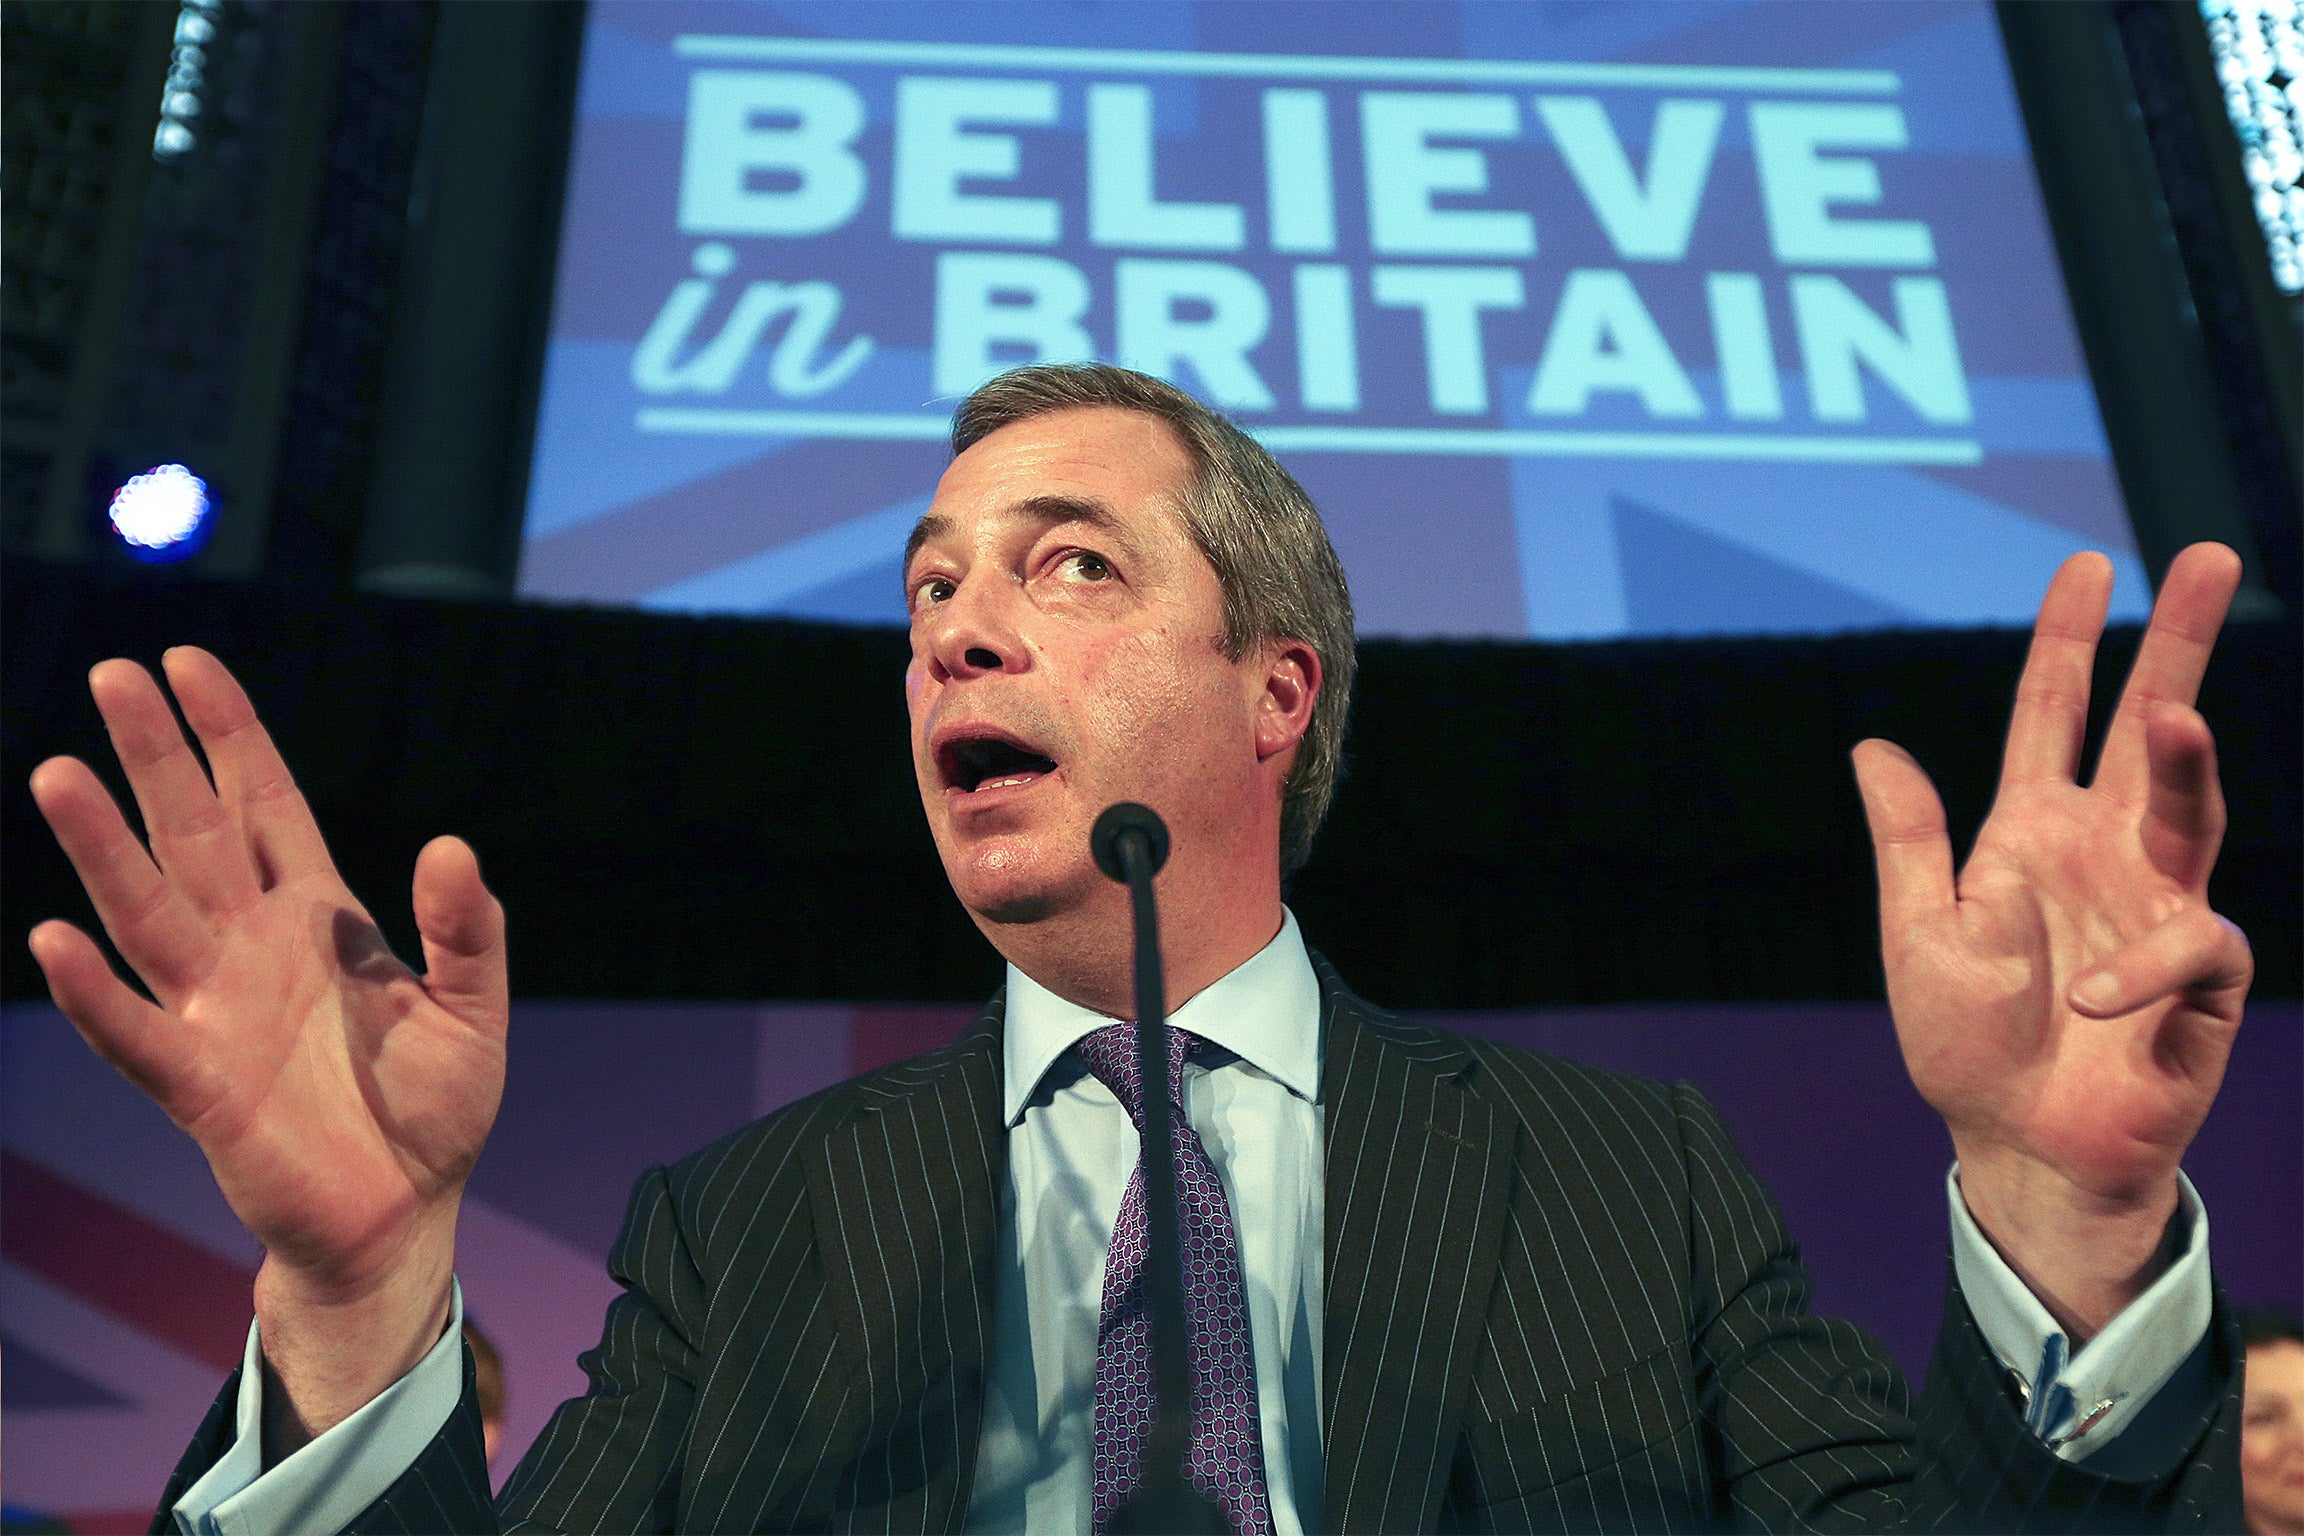 Nigel Farage's party has seen a tricky couple of weeks